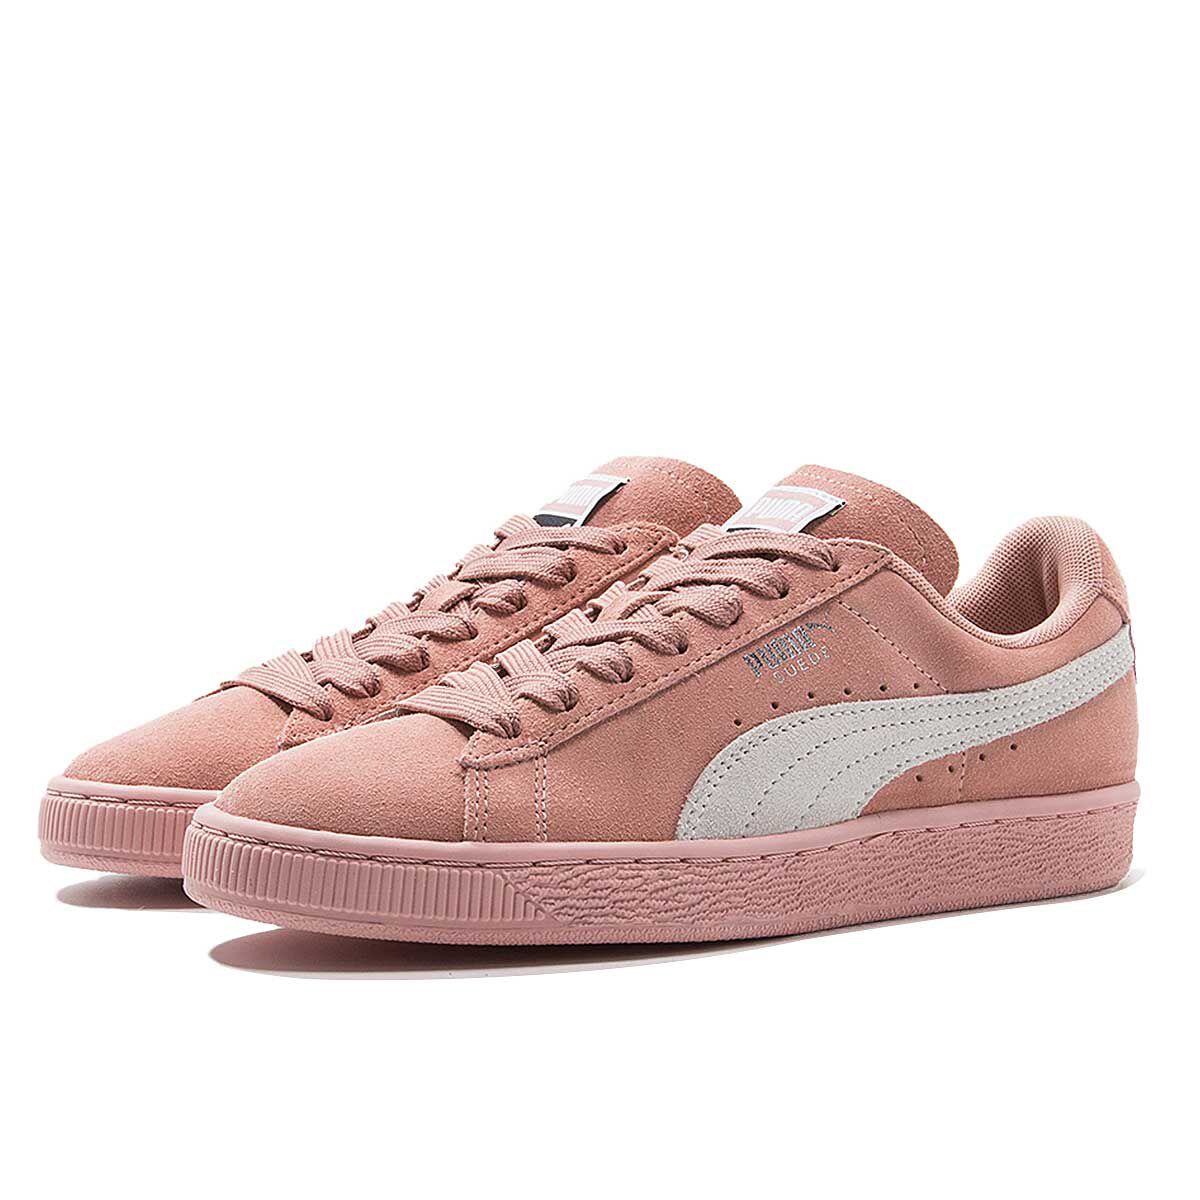 Buy Suede Classic Womens for N/A 0.0 on 